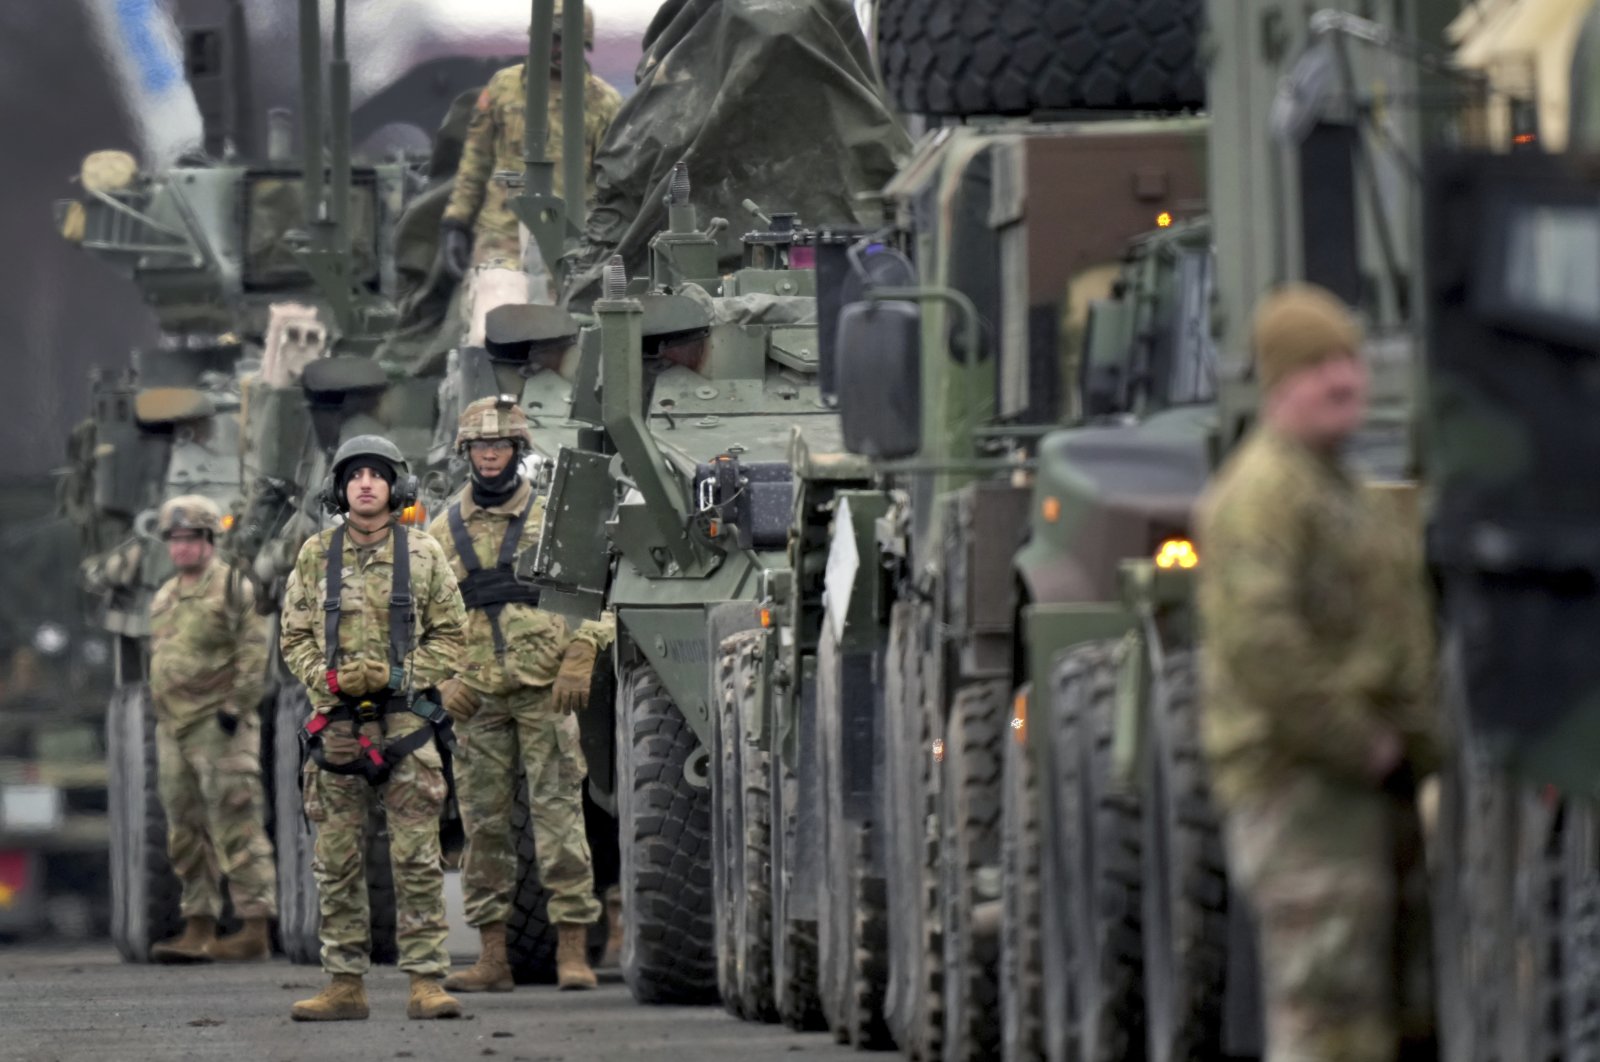 U.S. soldiers of the 2nd Cavalry Regiment line up vehicles at the military airfield in Vilseck, Germany, Feb. 9, 2022. (AP Photo)